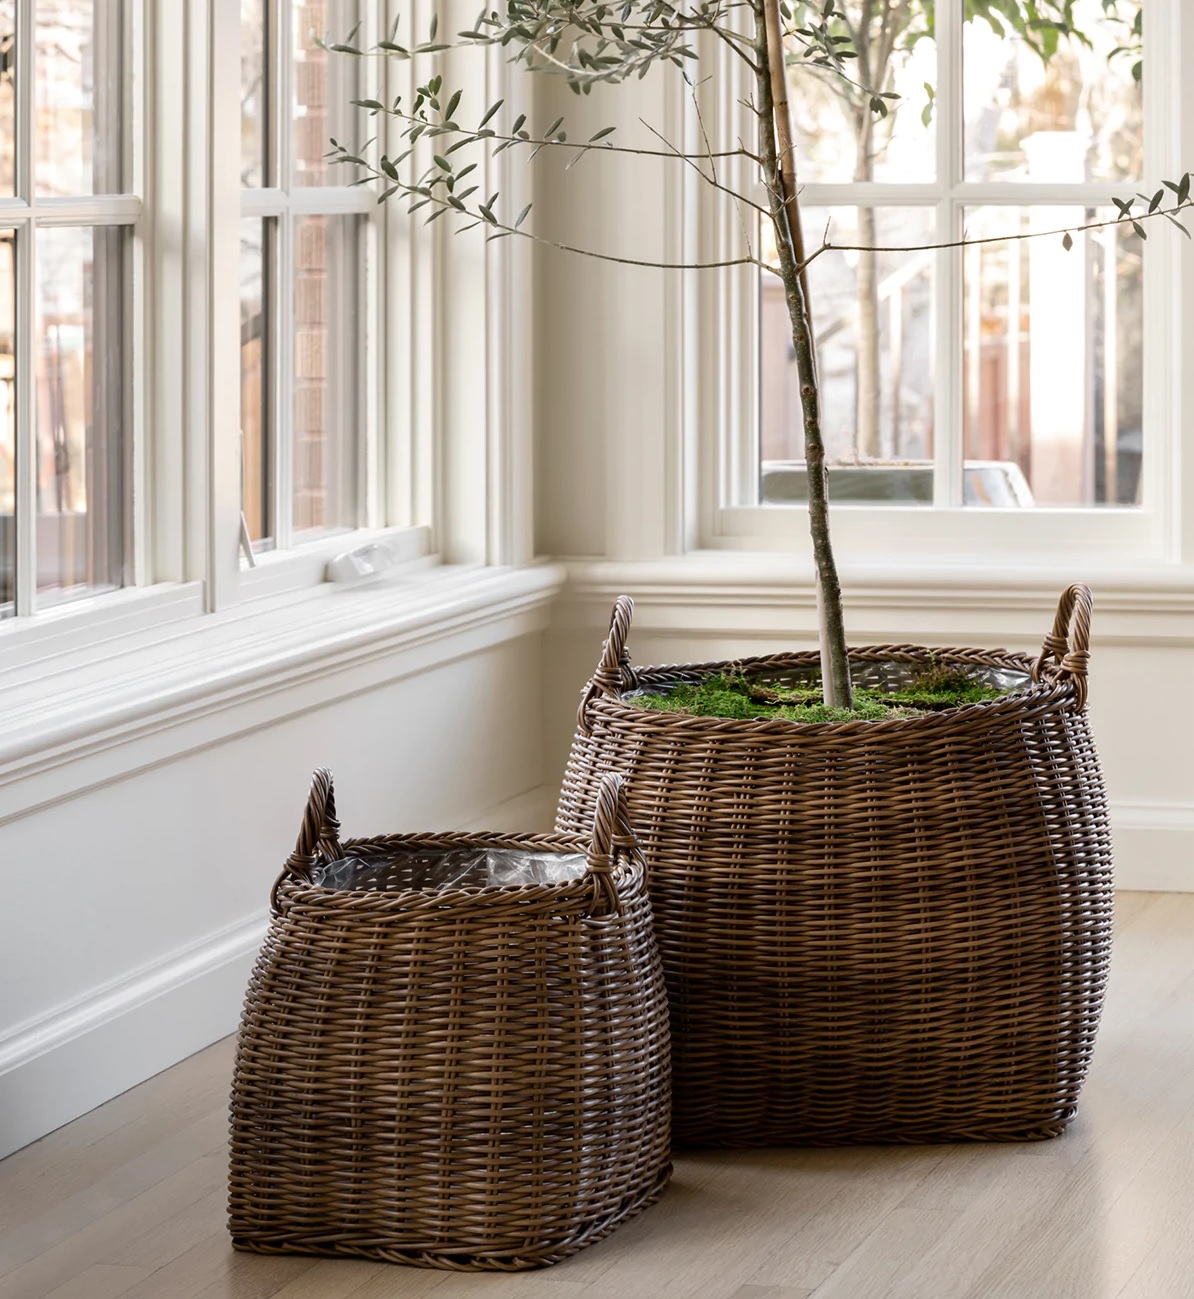 https://www.home-designing.com/wp-content/uploads/2022/08/cute-large-basket-planter-woven-faux-rattan-baskets-with-handles-lined-cachepots-for-small-indoor-trees-how-to-display-extra-large-houseplants.jpg